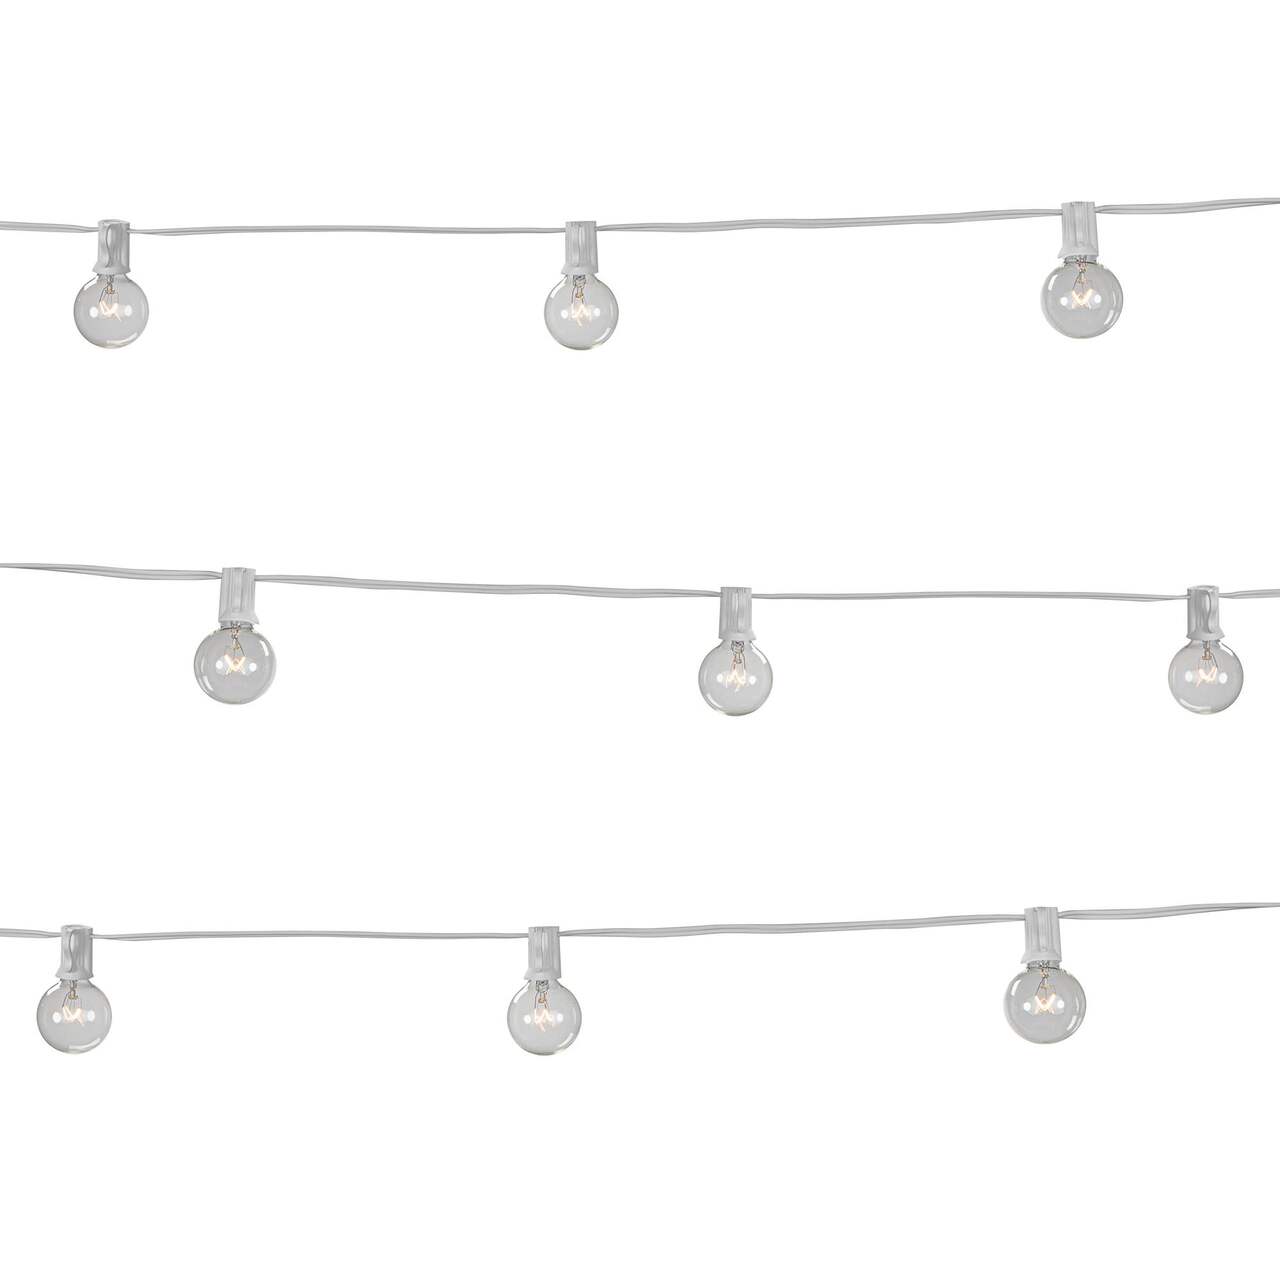 https://media-www.canadiantire.ca/product/fixing/electrical/lighting/0526175/merkury-10-indoor-outdoor-g40-cafe-string-light-f78a2c6e-56bf-4b38-8079-825a950b05f4-jpgrendition.jpg?imdensity=1&imwidth=640&impolicy=mZoom